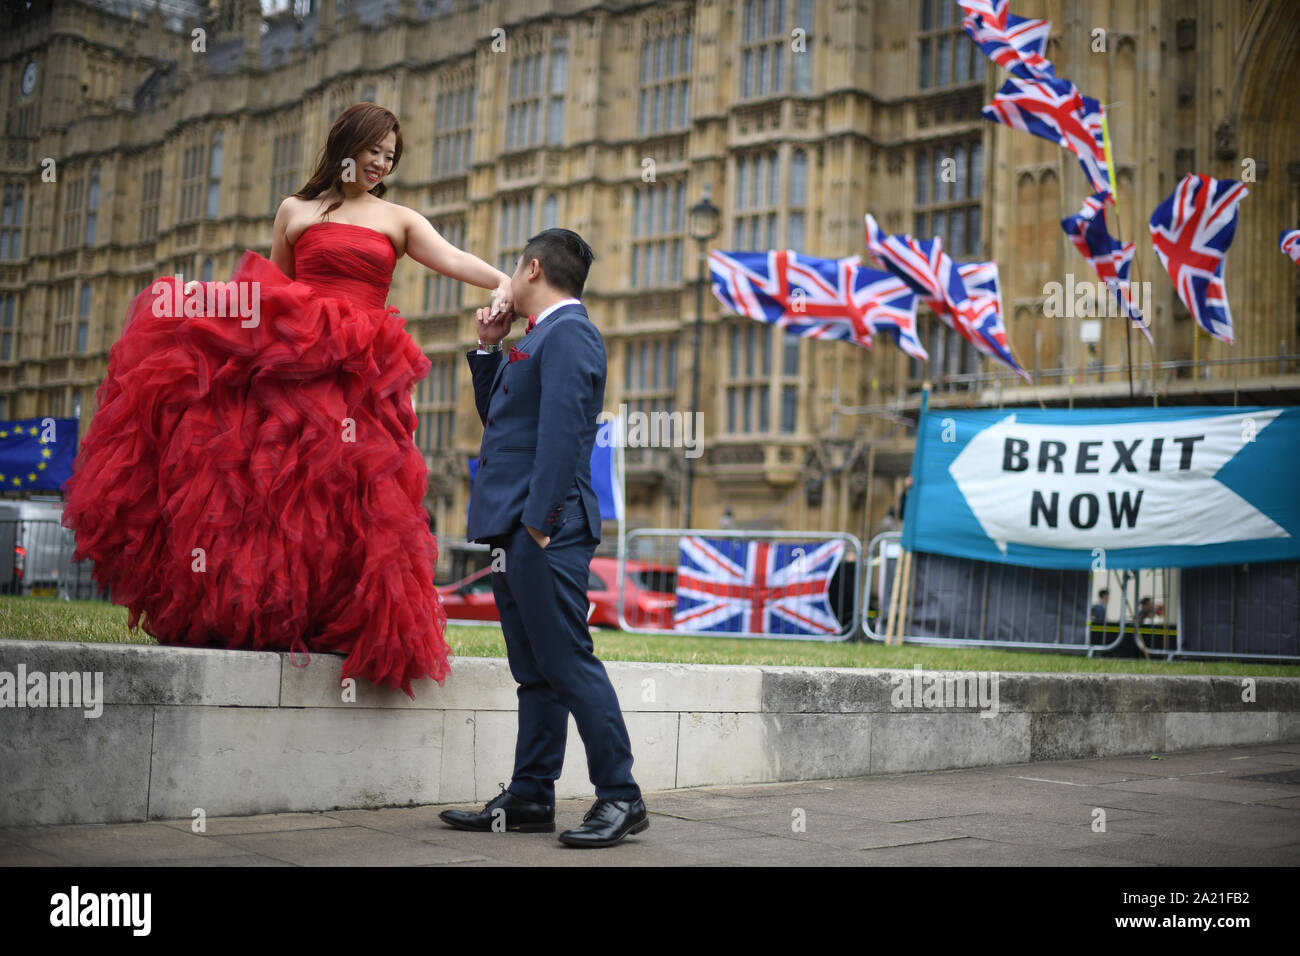 Two tourists posing for pictures in front of Union and EU flags outside the Palace of Westminster, London. Stock Photo